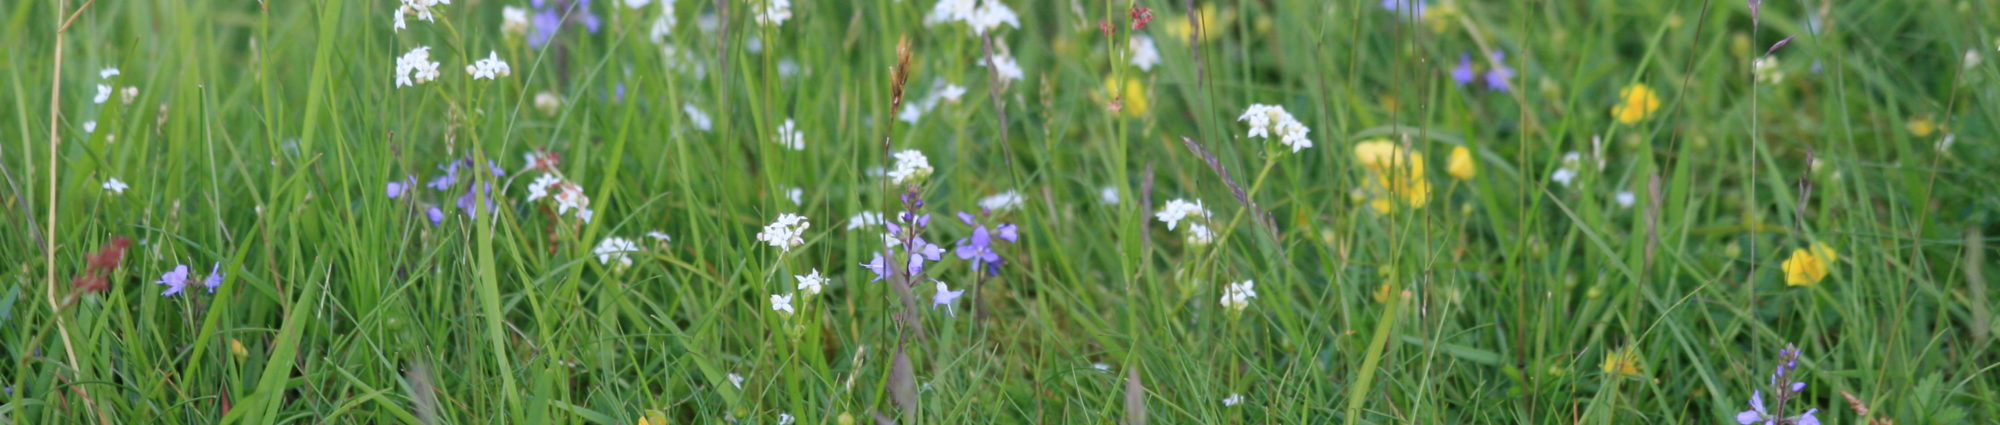 Wildflowers blooming in a field at the farmstay